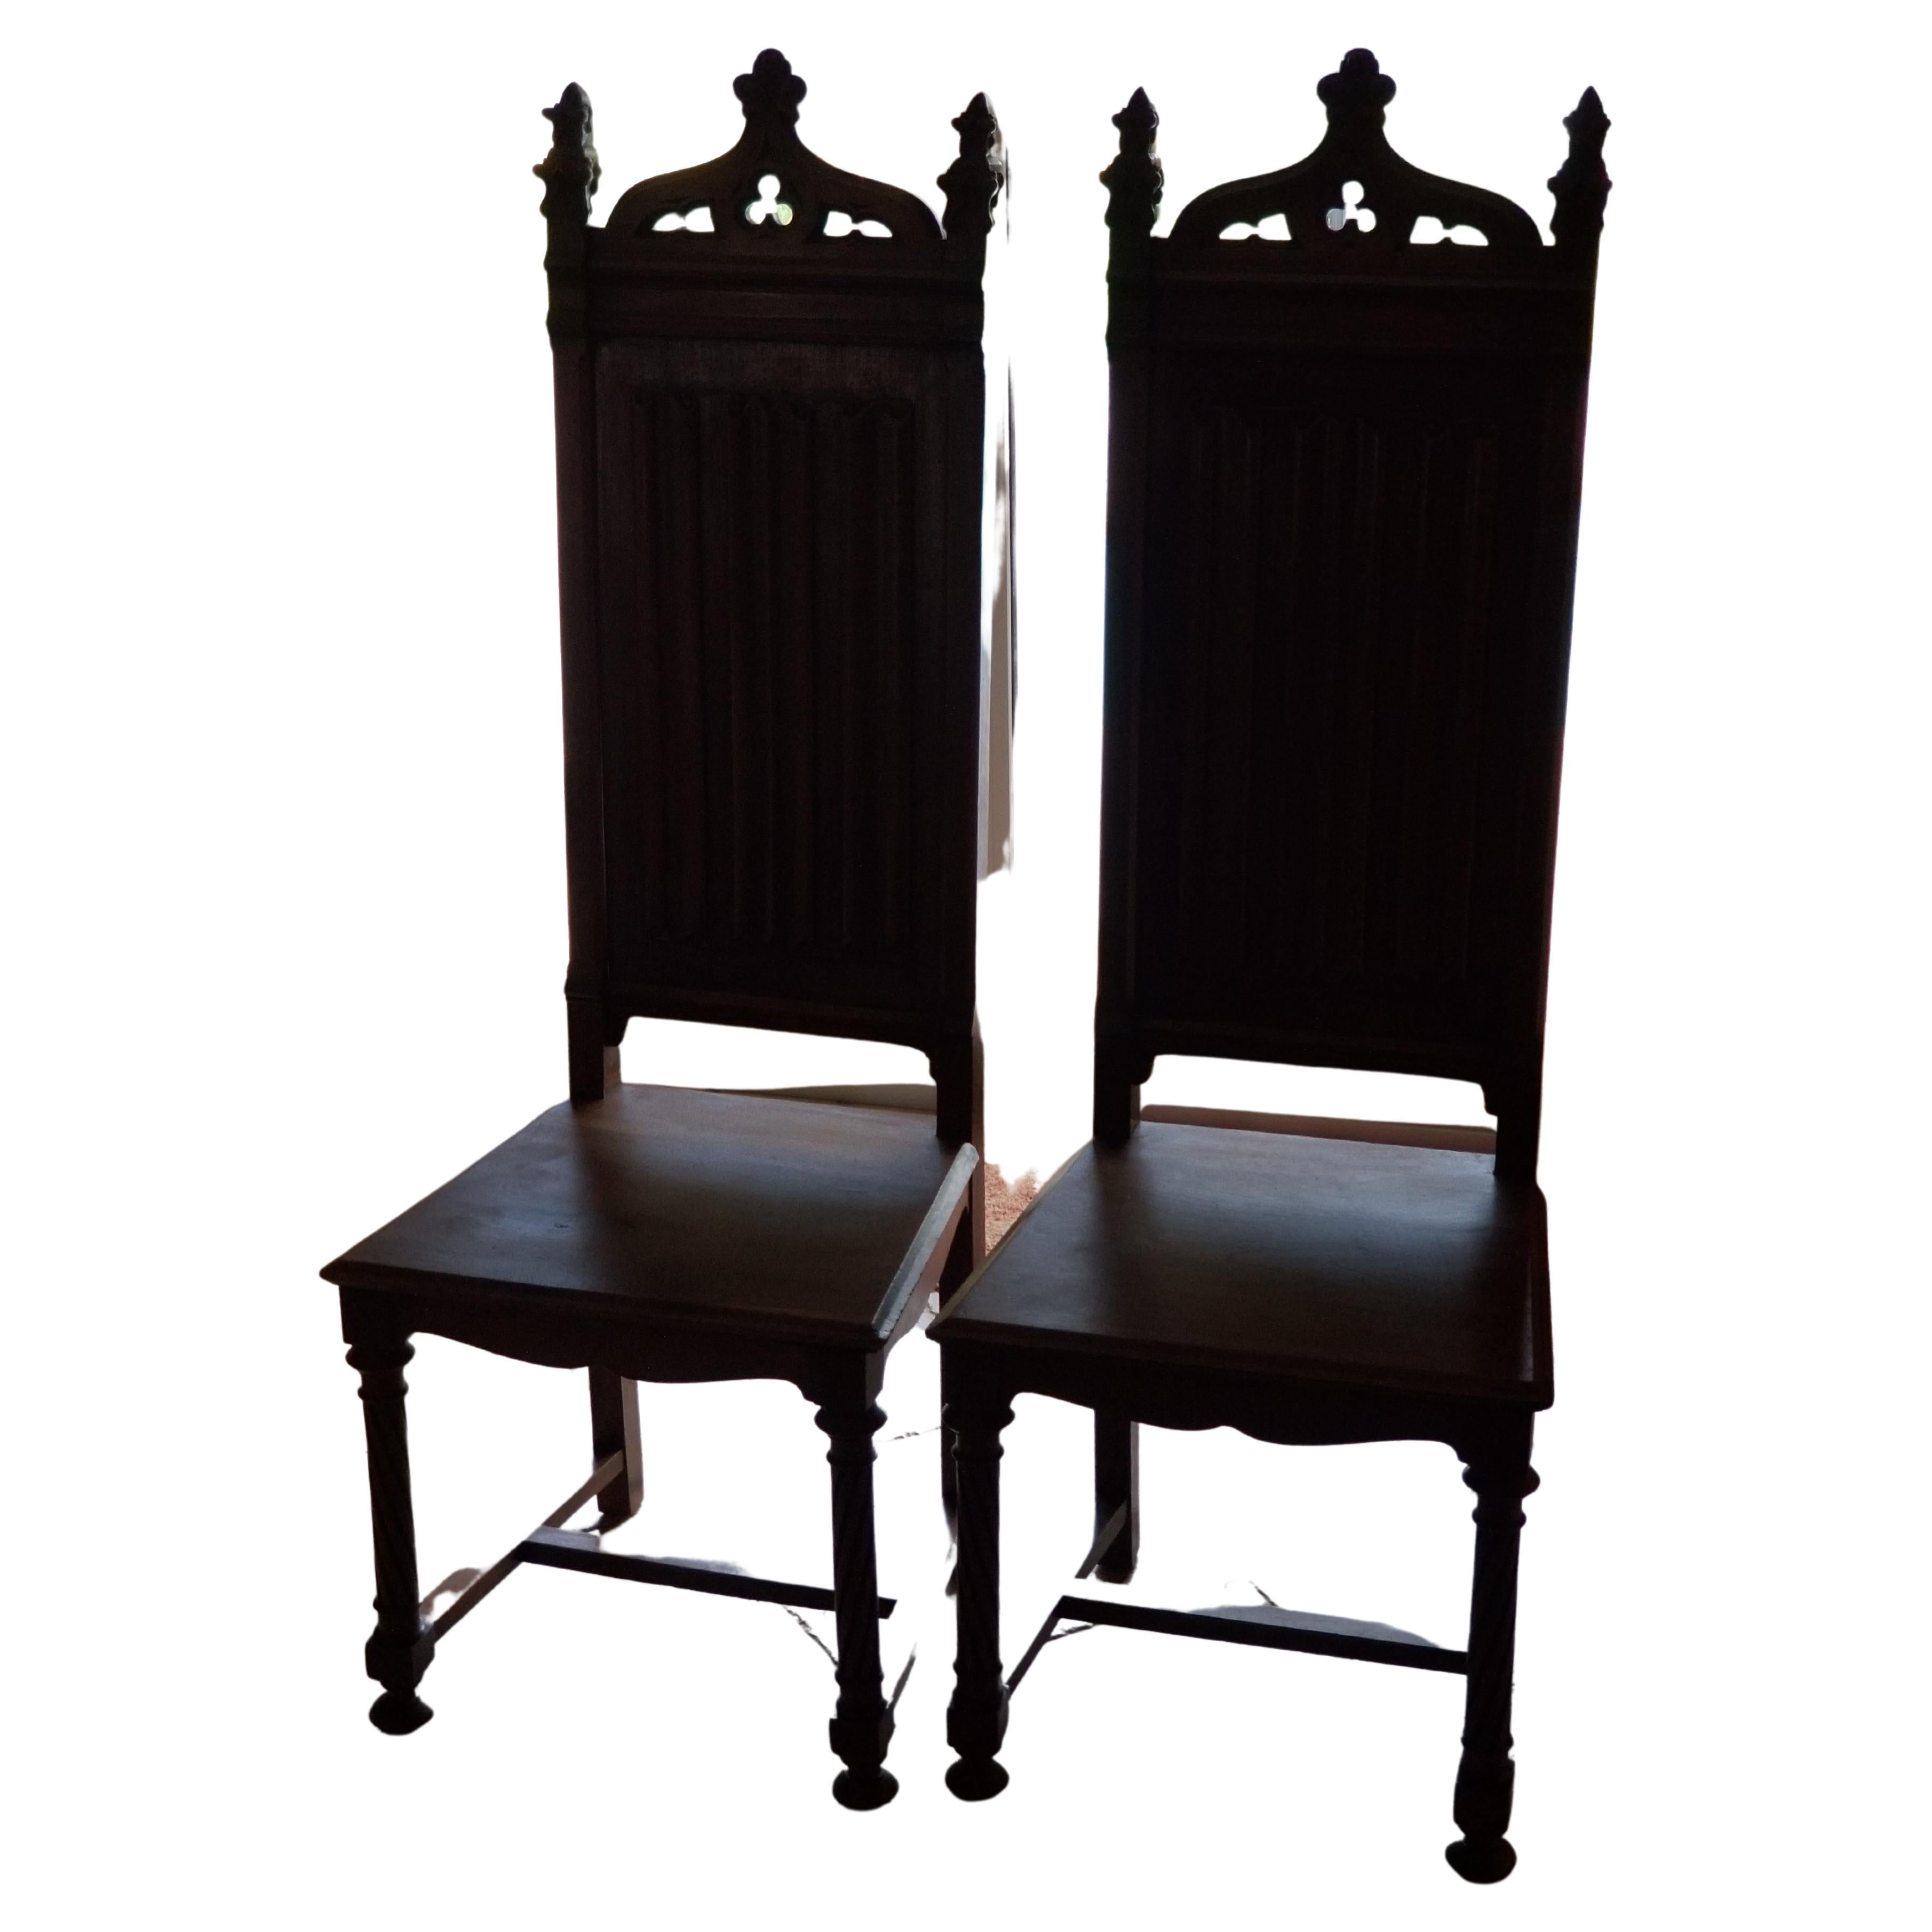 Gothic Revival 1800s Chairs (2) For Sale at 1stDibs